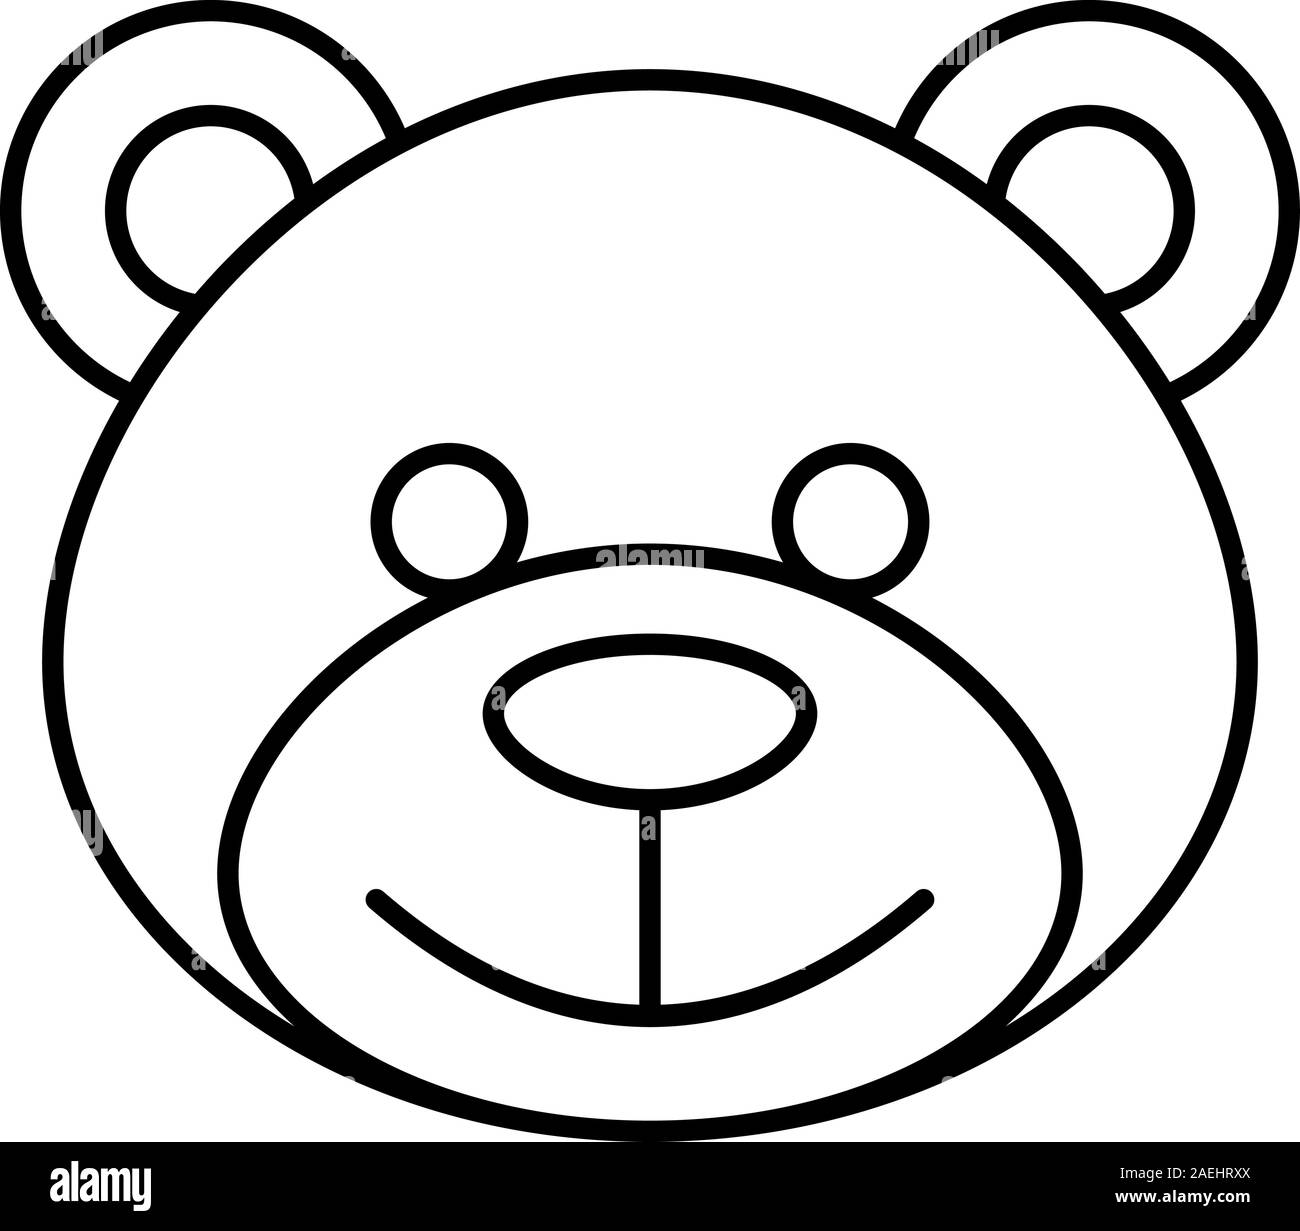 Teddy bear linear icon. Thin line illustration. Contour symbol. Vector isolated outline drawing Stock Vector